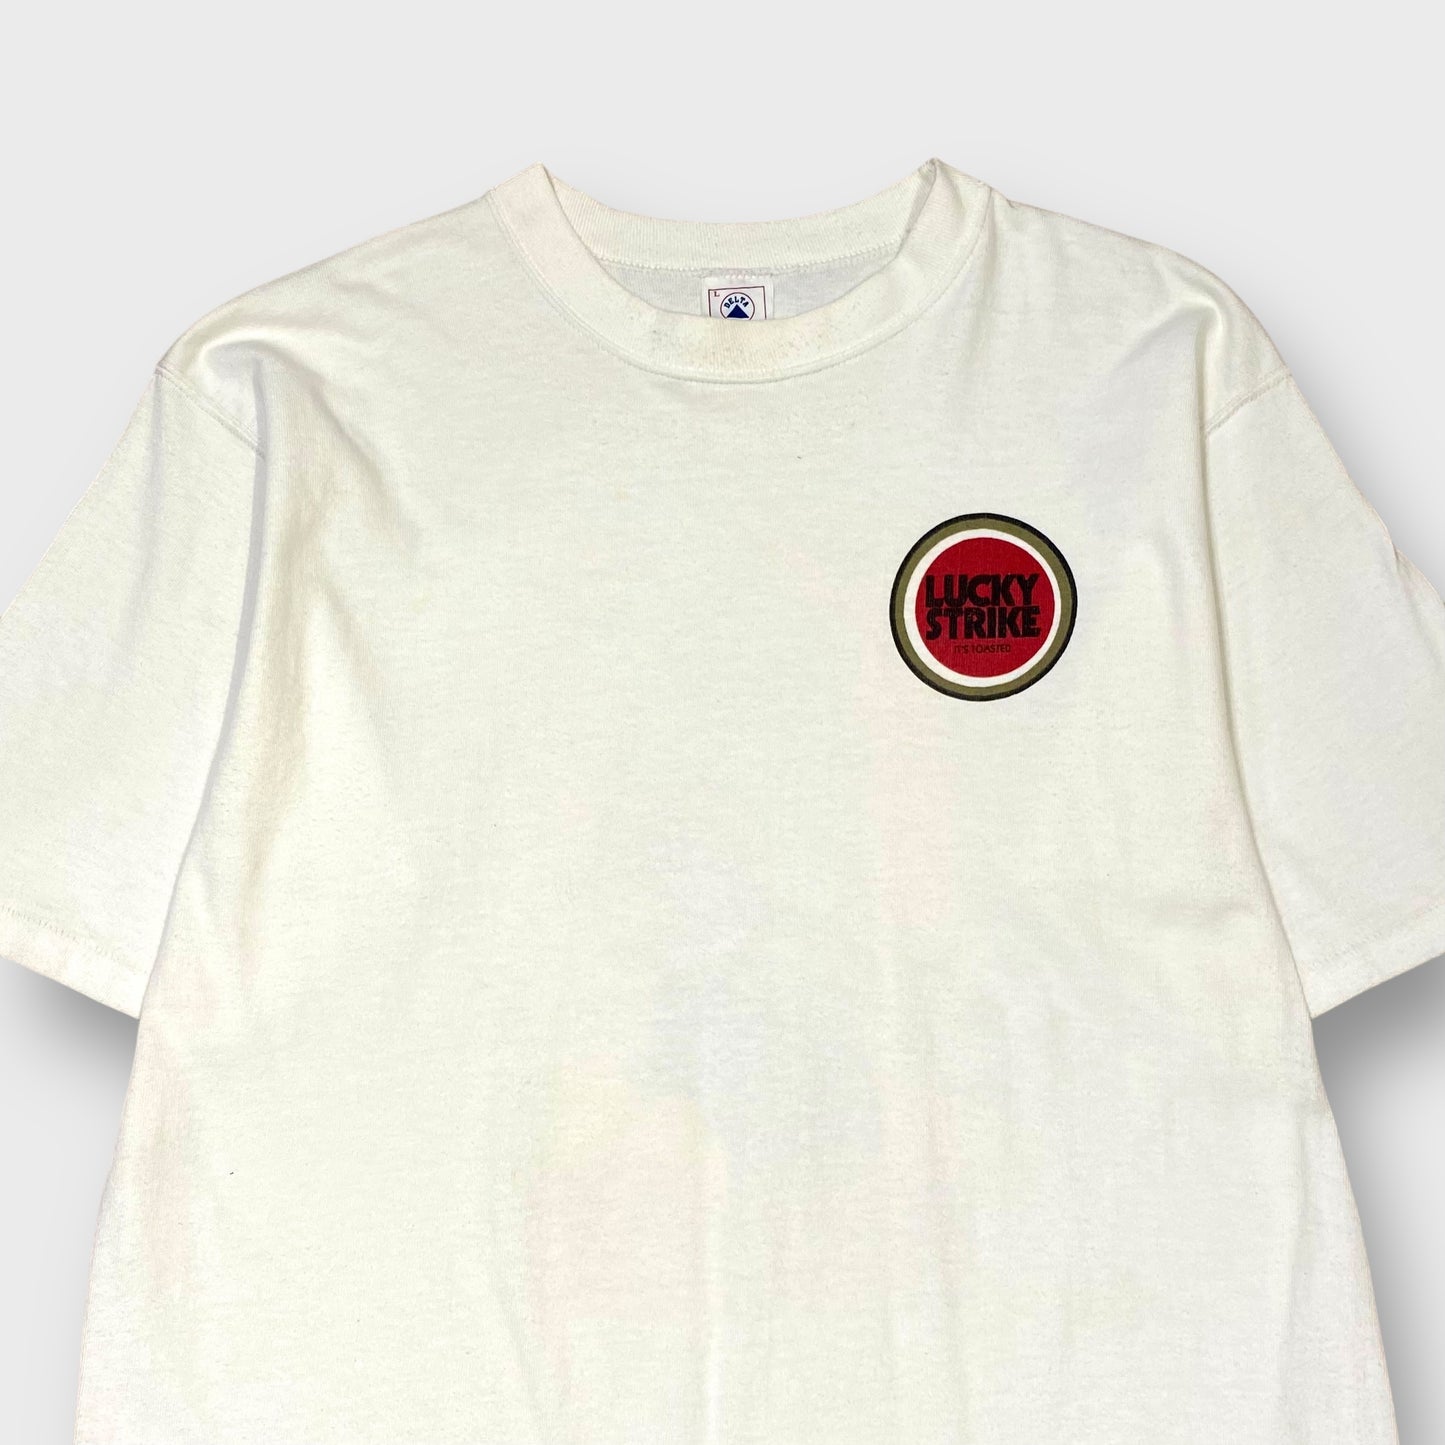 90's "LUCKY STRIKE" FIFA worldcup t-shirt